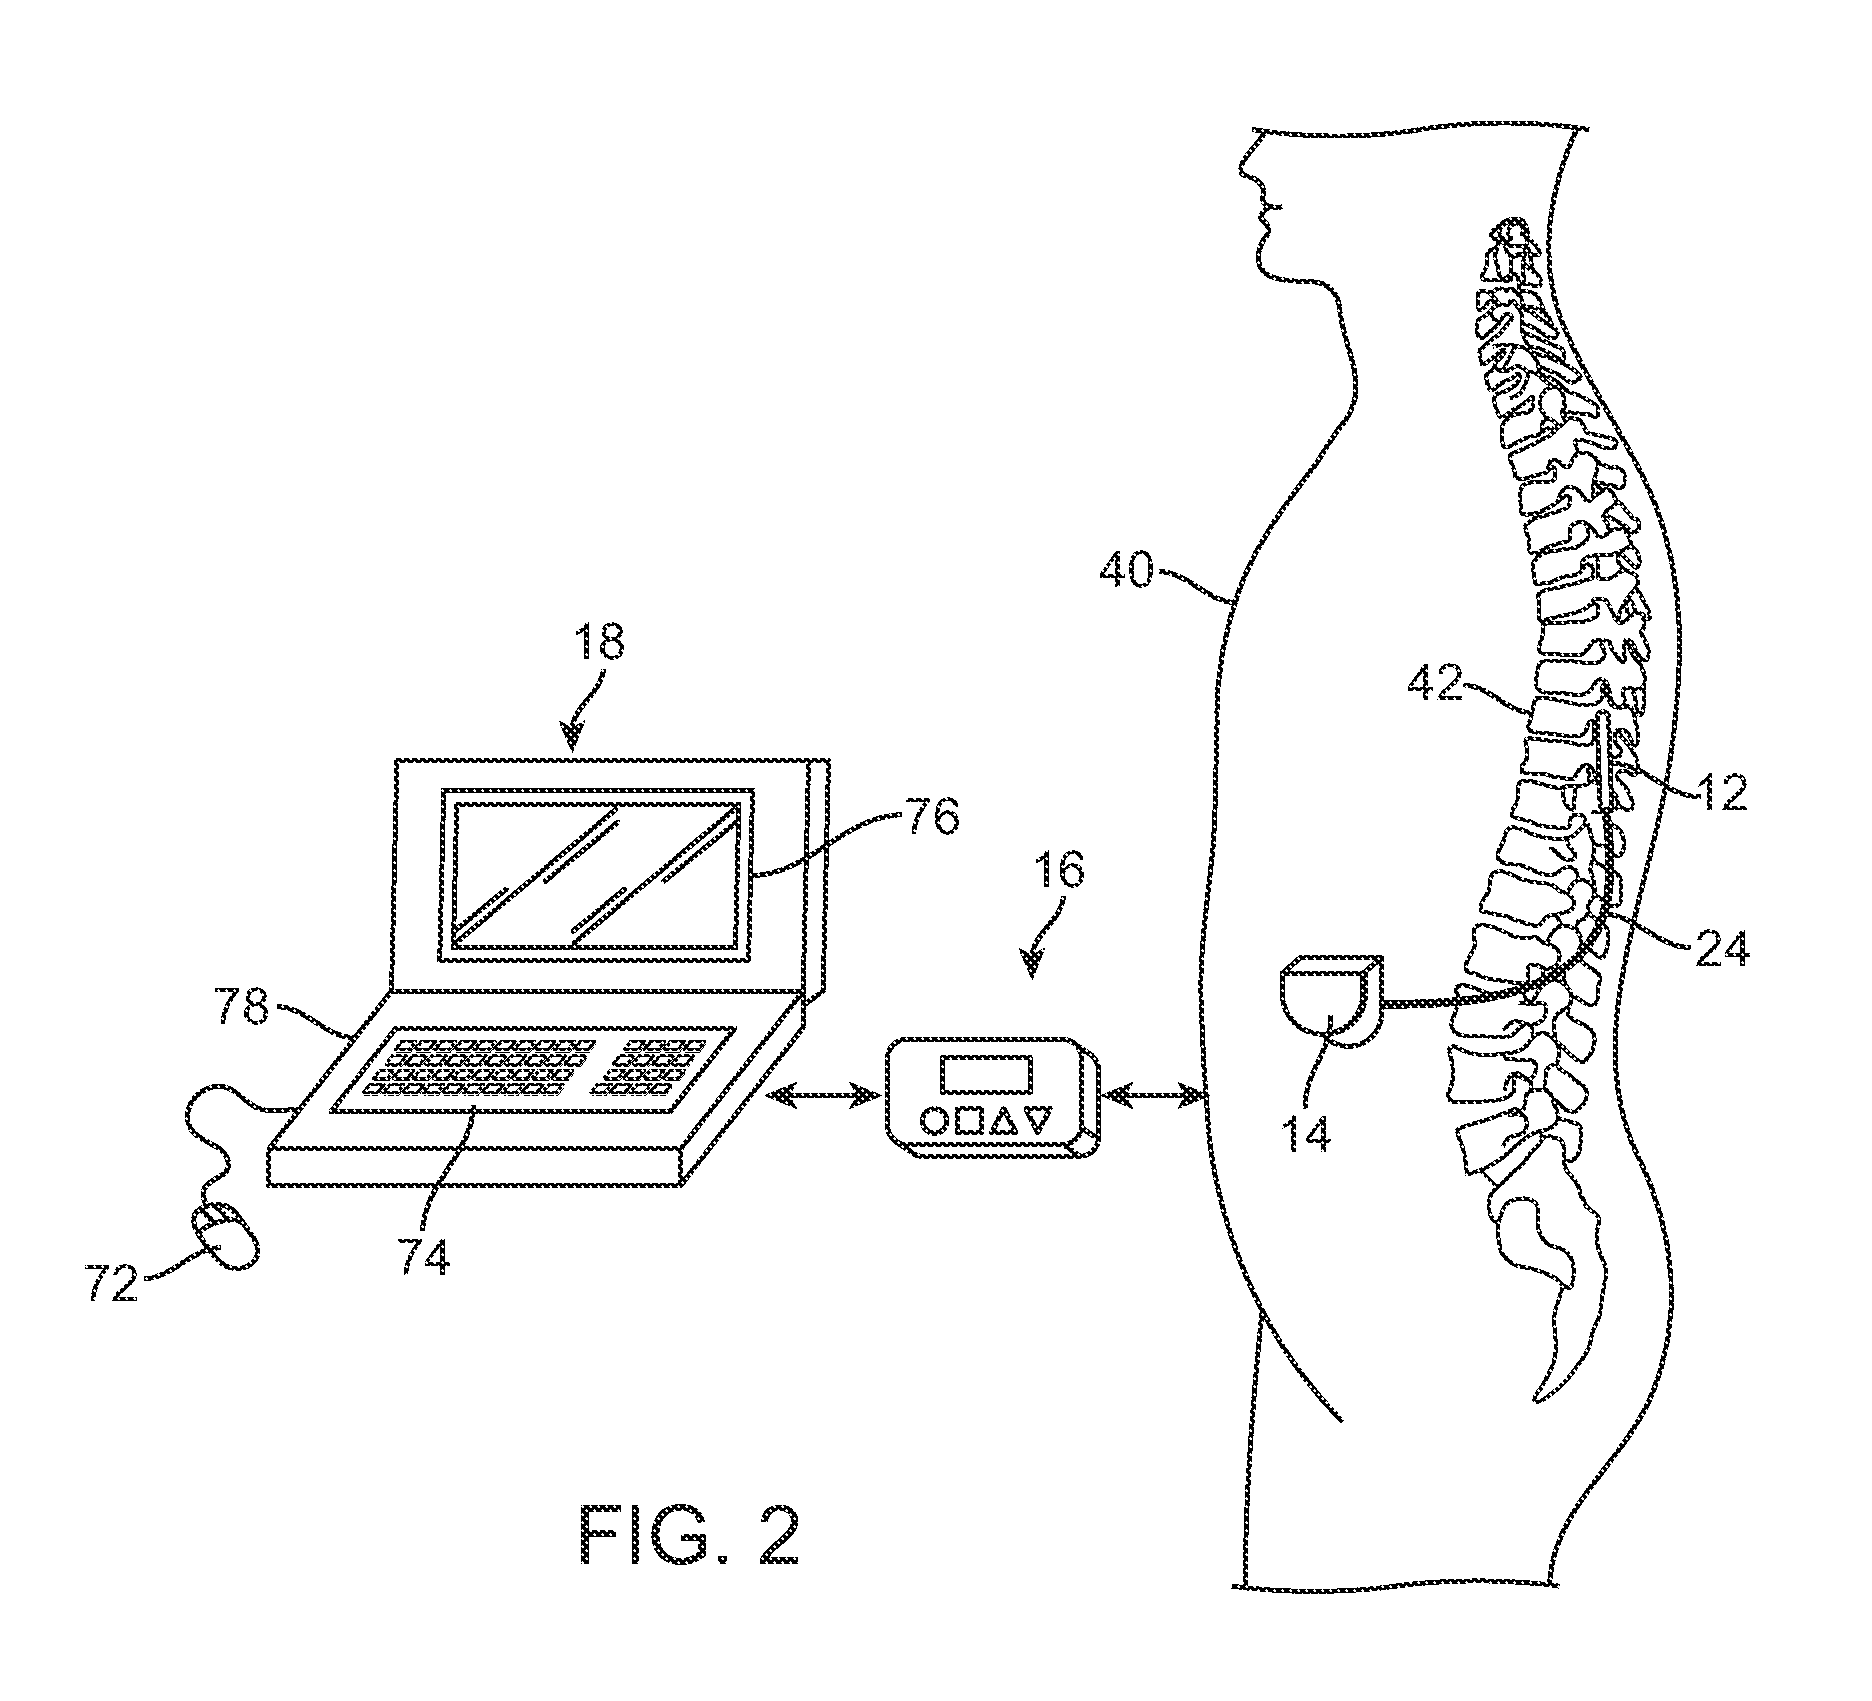 Tissue stimulation system and method with anatomy and physiology driven programming